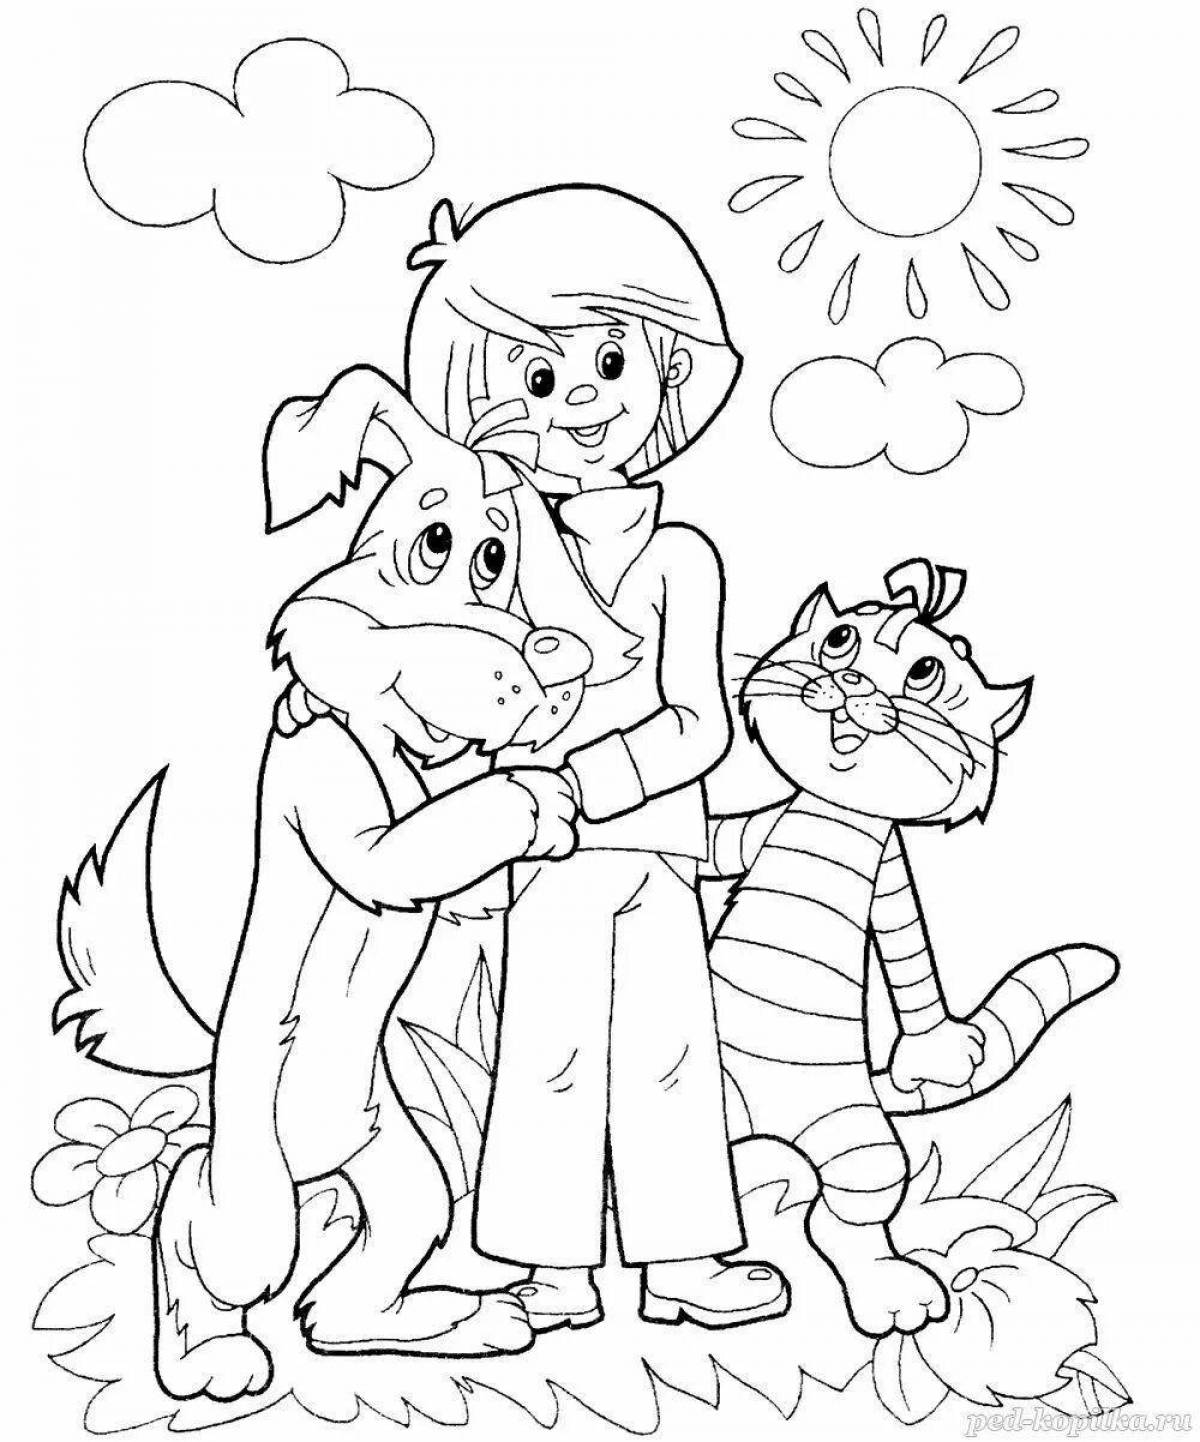 Glamorous sailor skin coloring page for toddlers